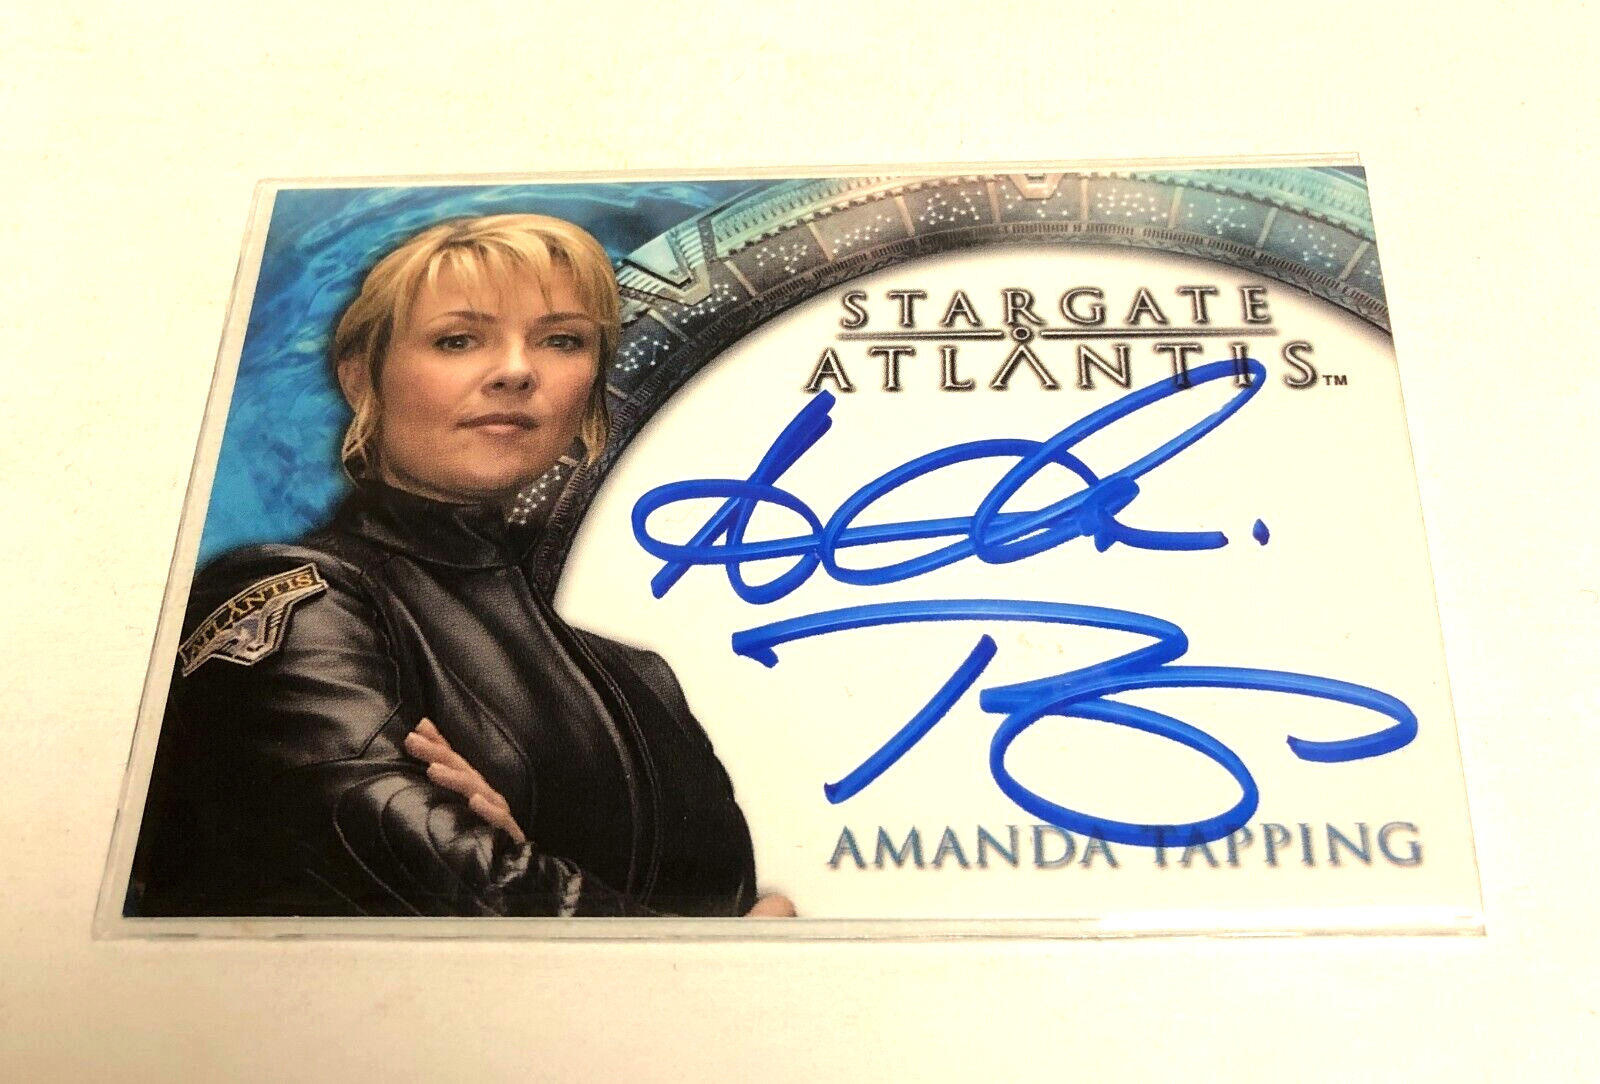 2008 Stargate: Atlantis Autograph Card Signed by Amanda Tapping Limited Edition